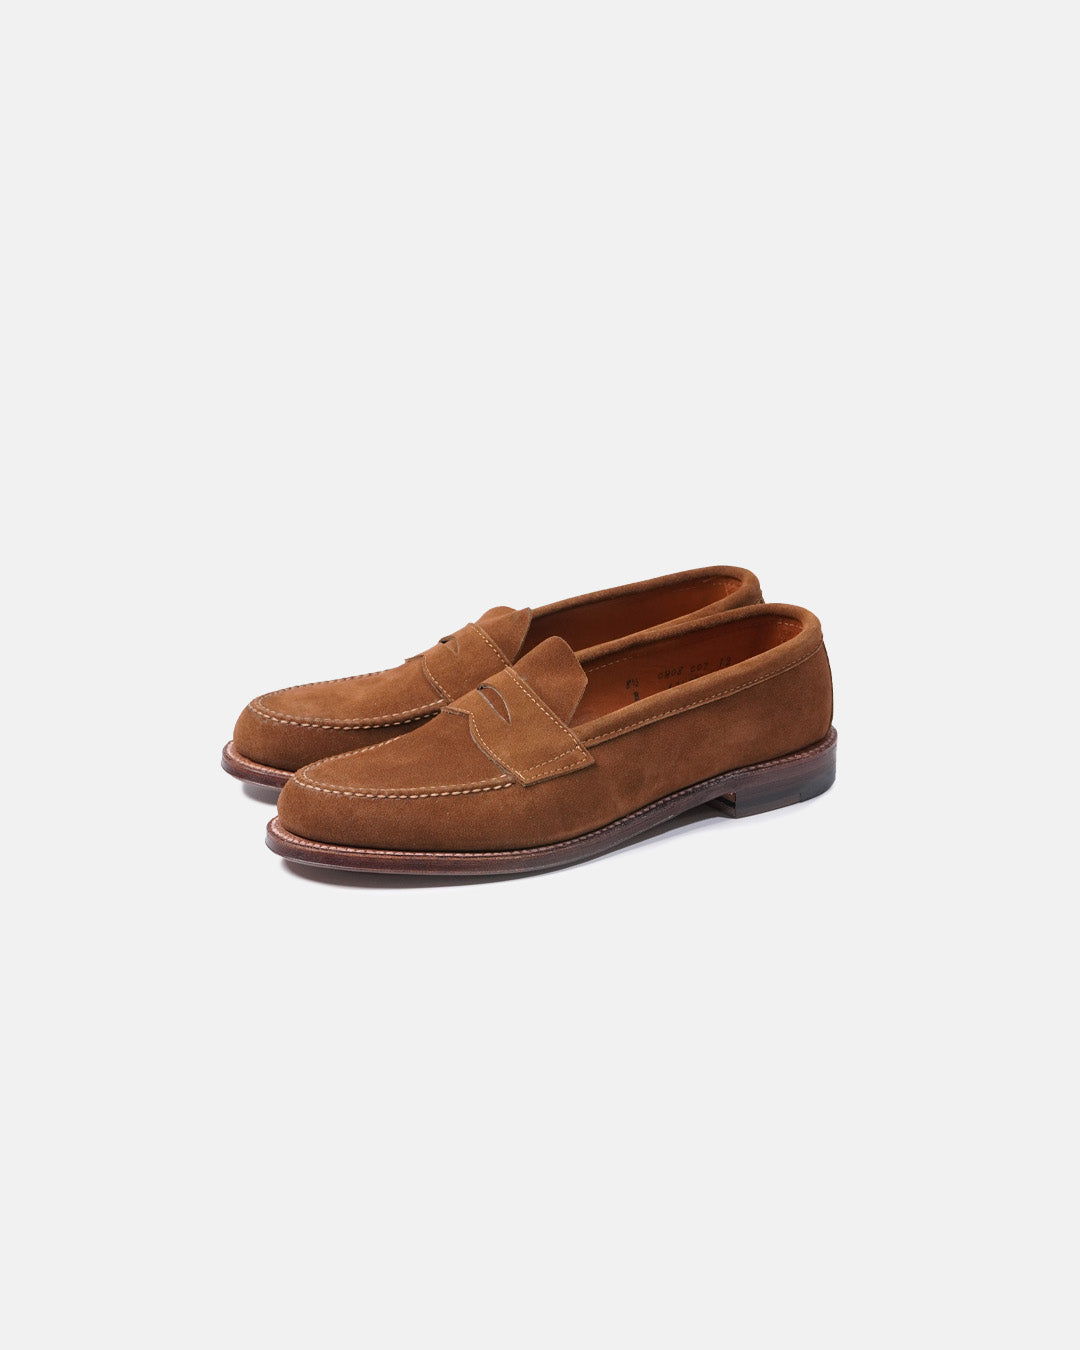 Alden Unlined Snuff Suede 6243F